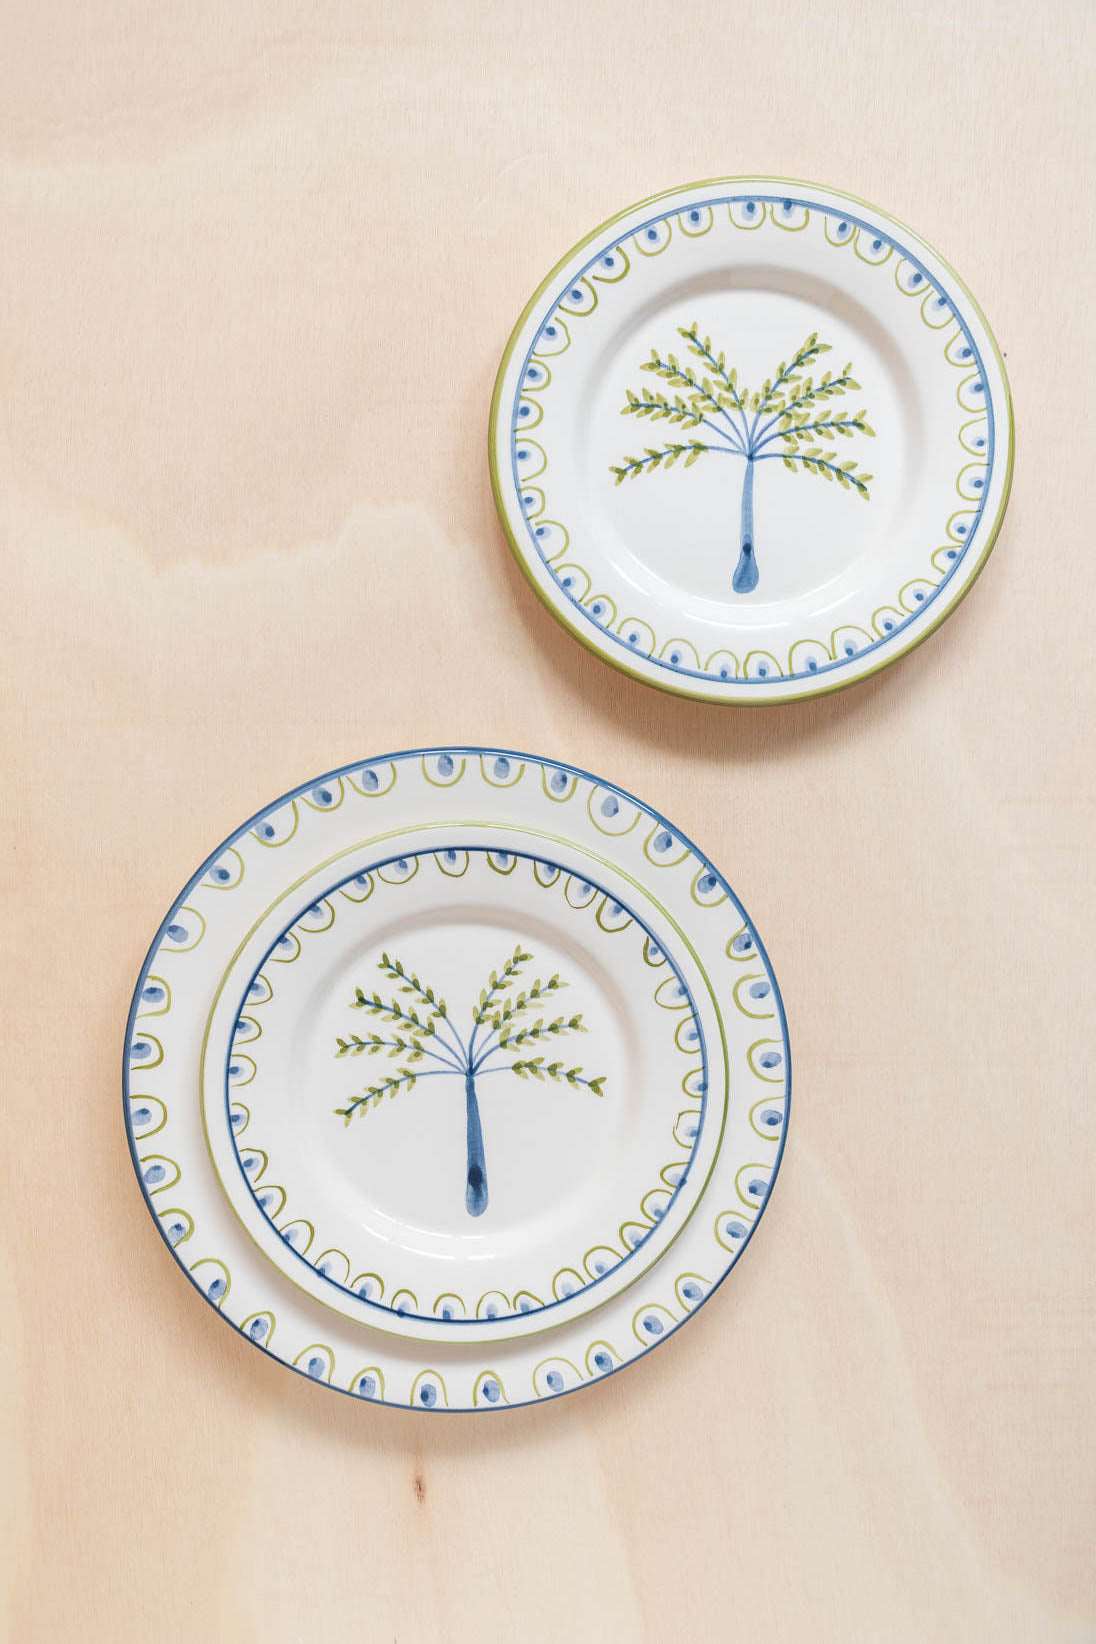 Coconut Tree Hand-Painted Ceramic Dessert Plate - White, Green, and Blue - Matching with Coconut Dinner Plate